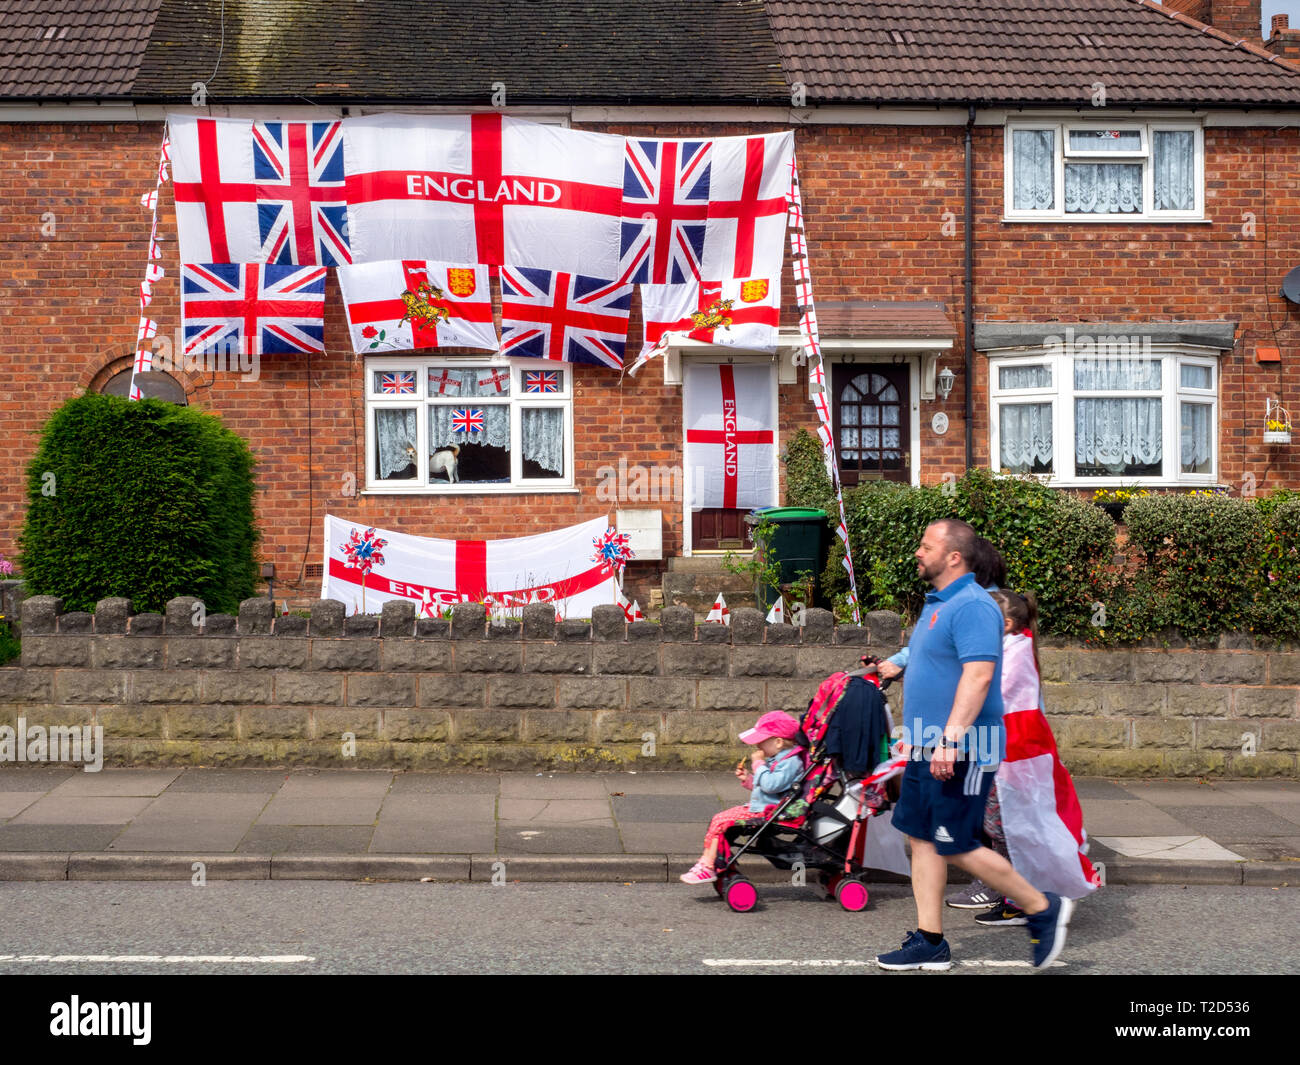 A house decorated with England and the union flag of Great Britain. Stock Photo